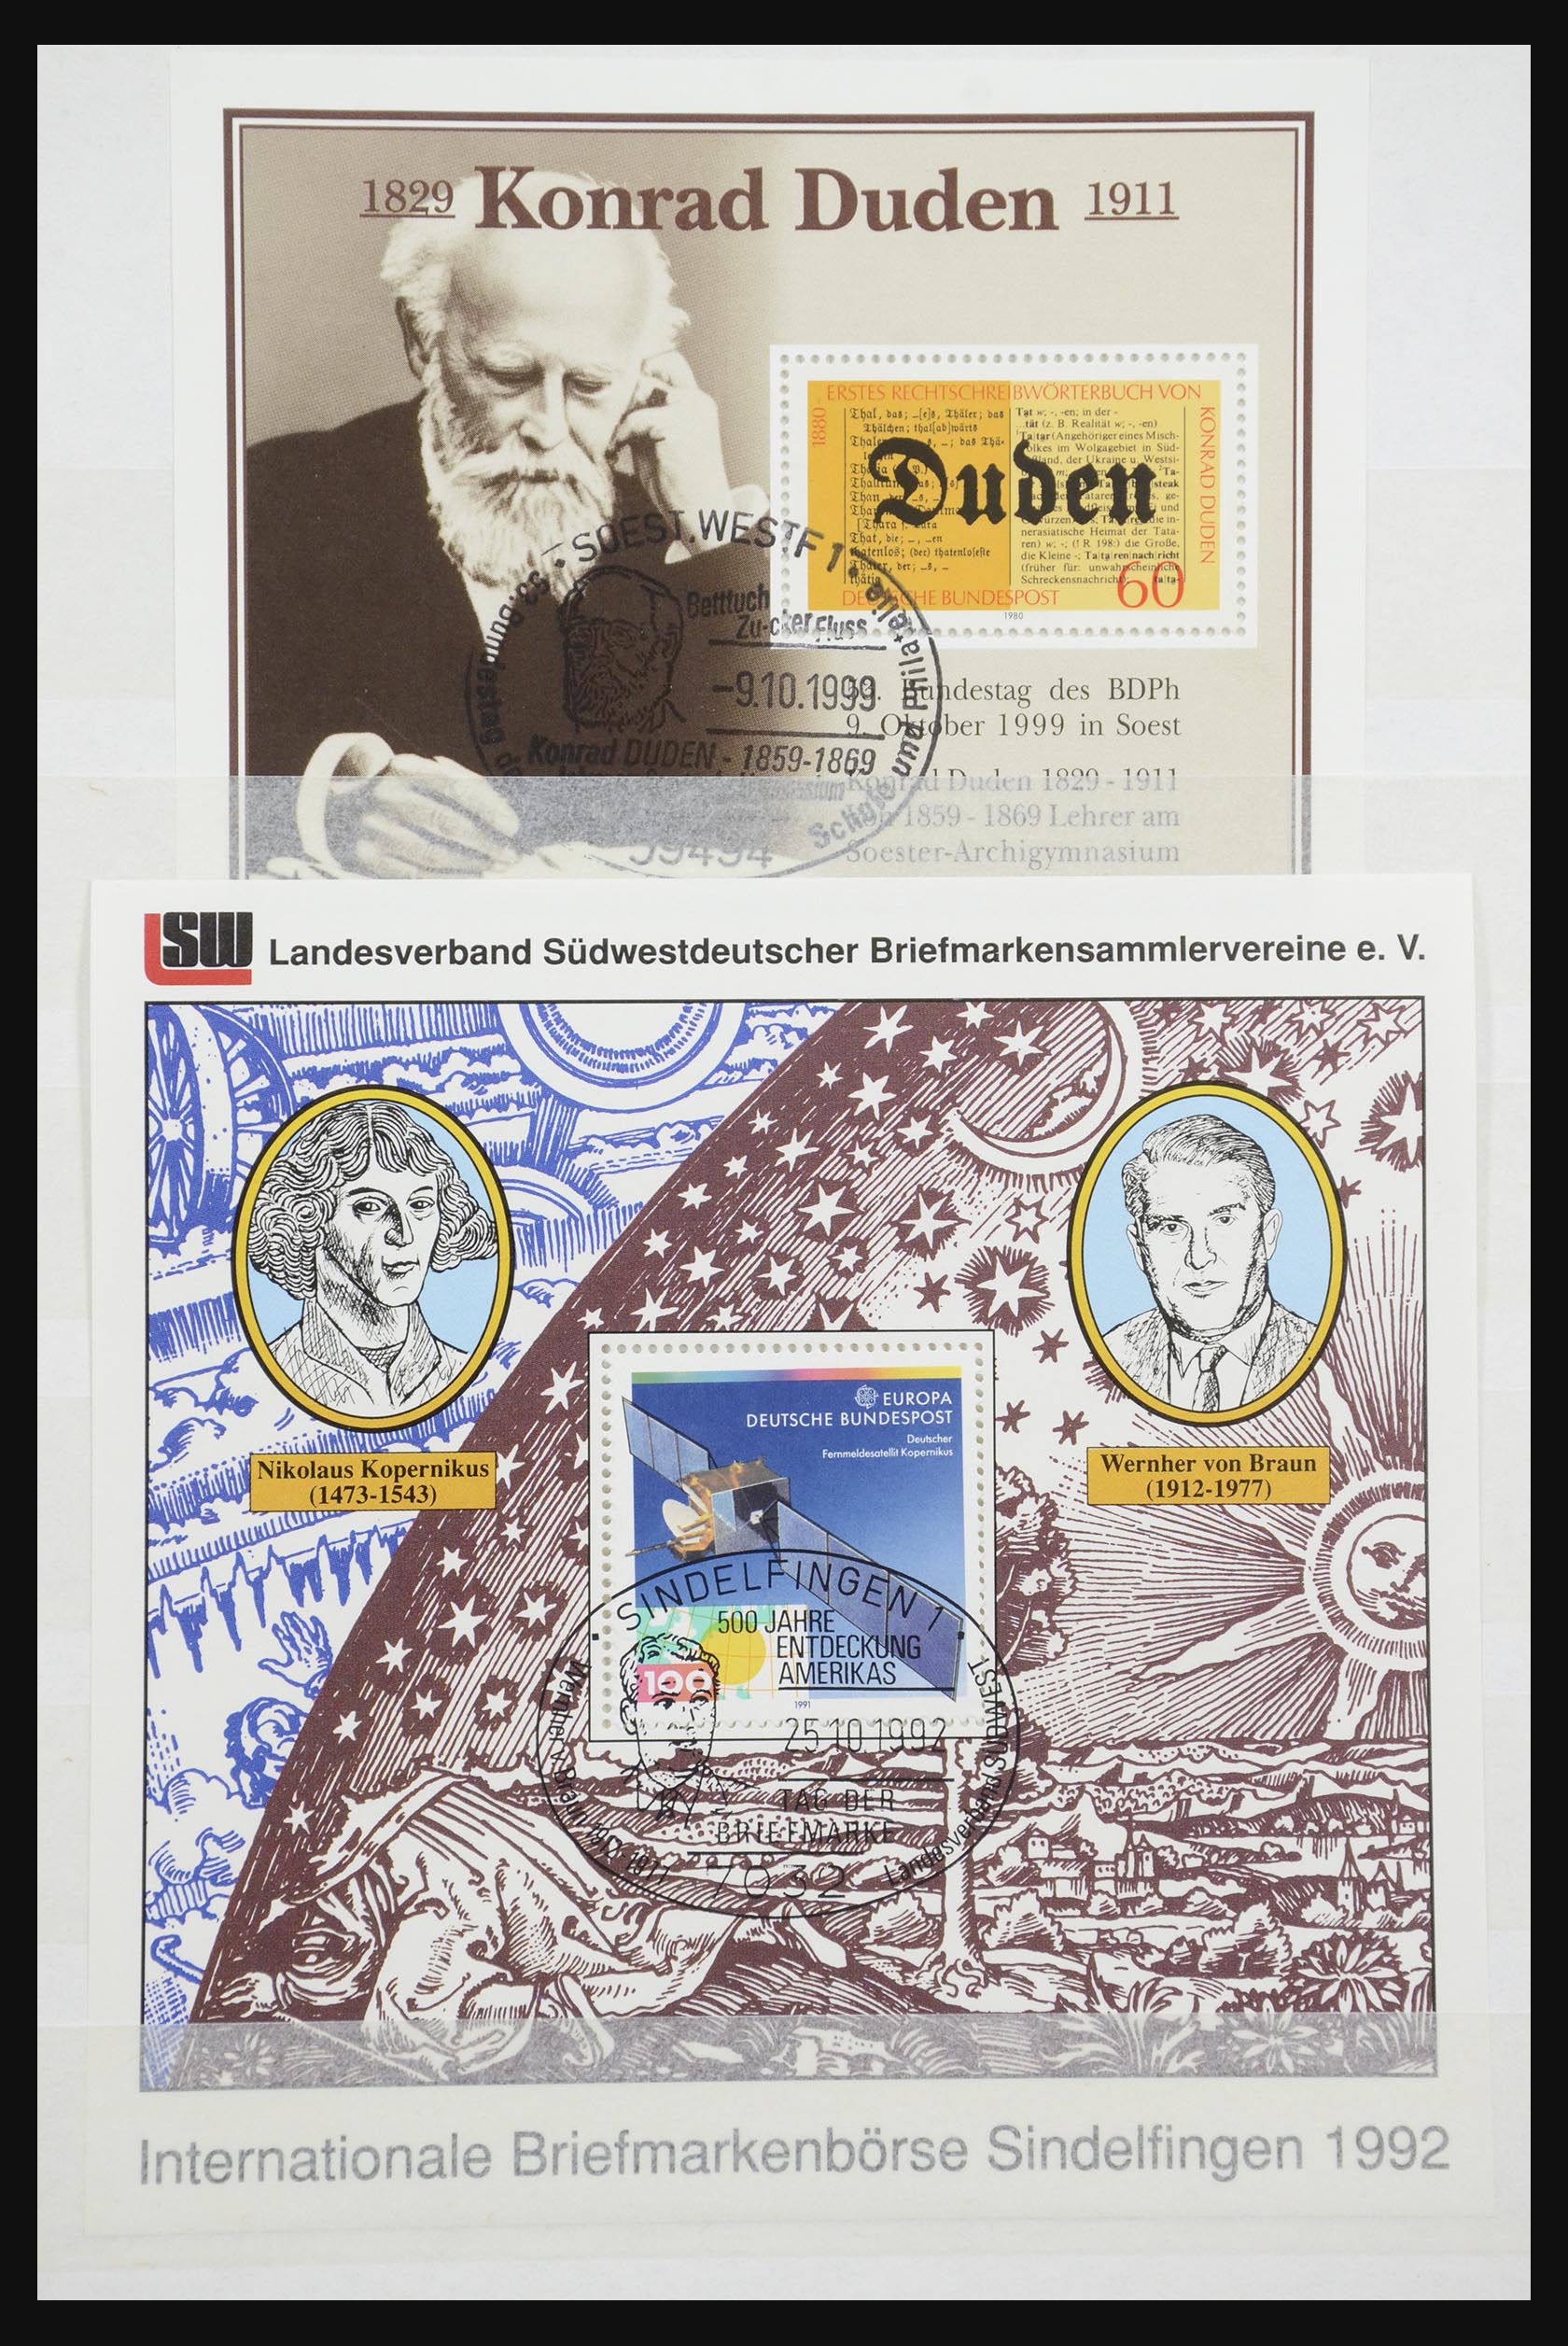 32050 044 - 32050 Bundespost special sheets 1980-2010.